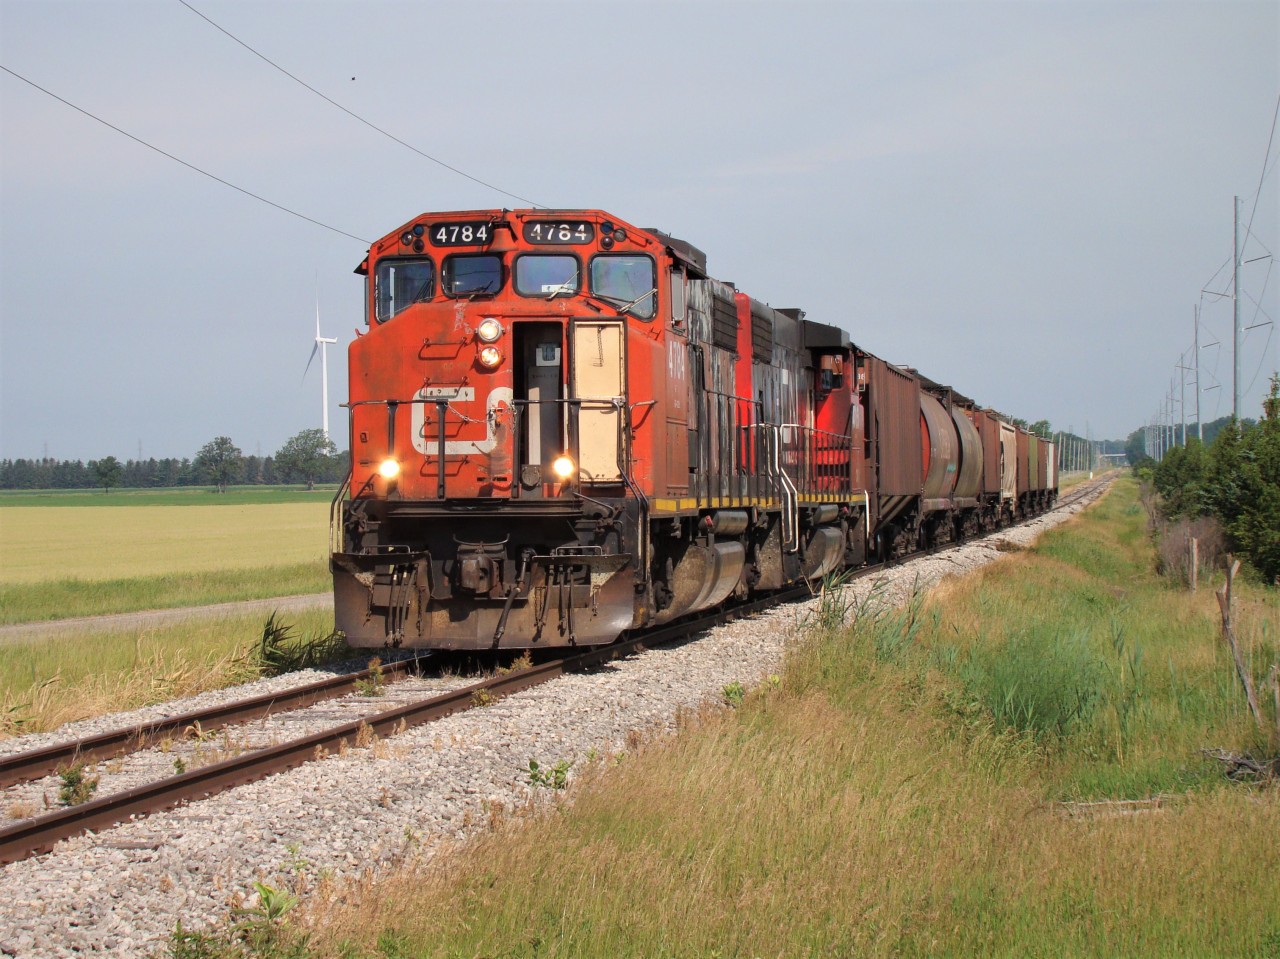 CN 4784 and sister unit 4785 lead a 10 car train destined for the large elevator in Blenheim. After about an hour of switching, the train would return to Chatham with 10 loaded hoppers.